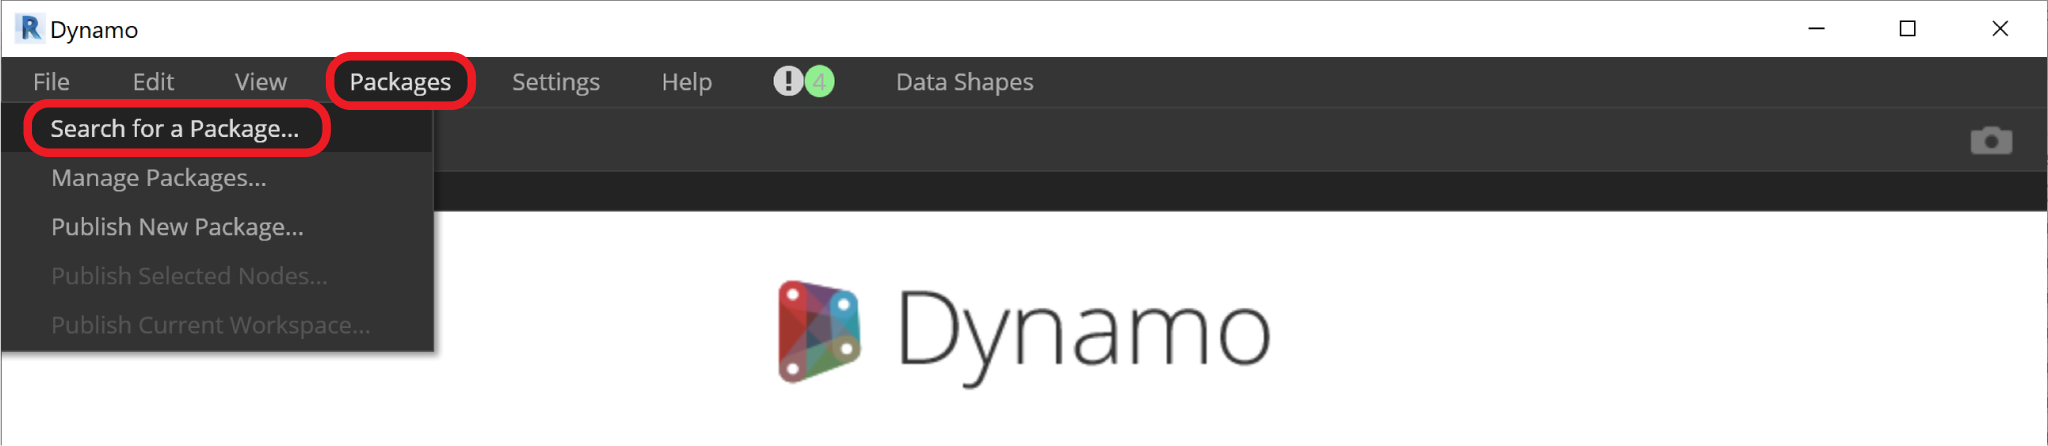 install dynamo packages